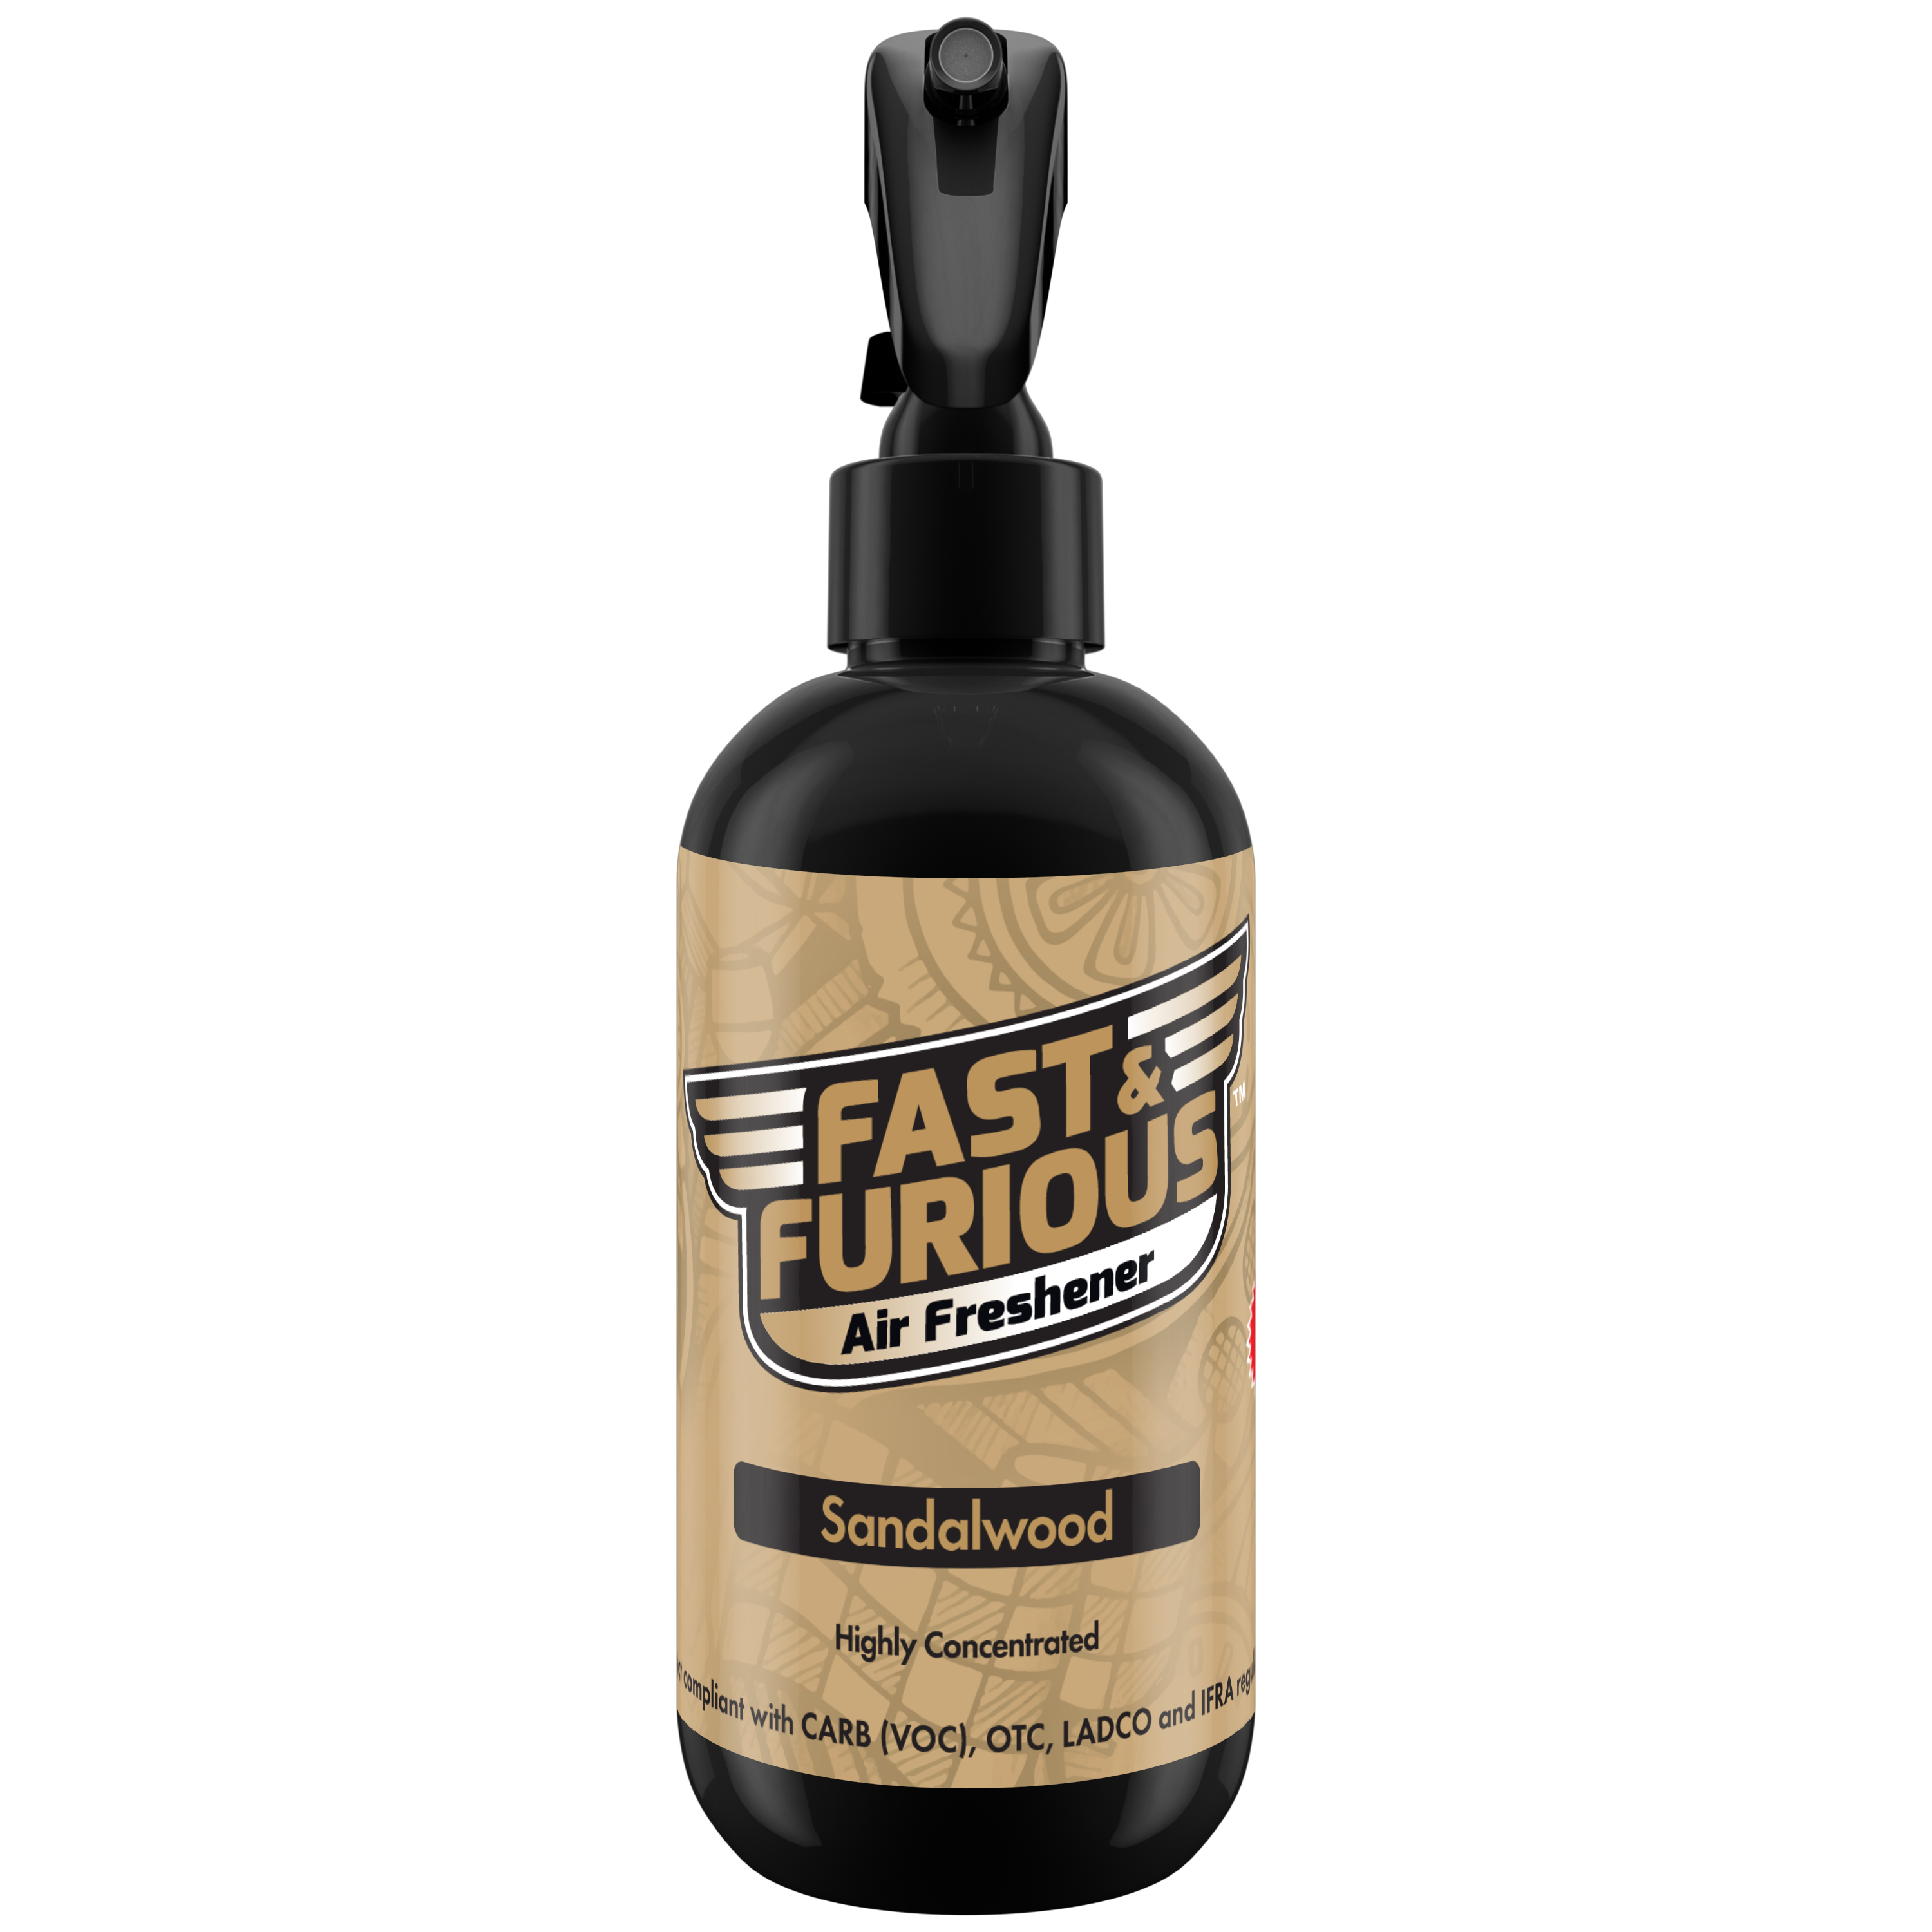 Fast and Furious Air Freshener - Sandalwood Scent Size: 8oz